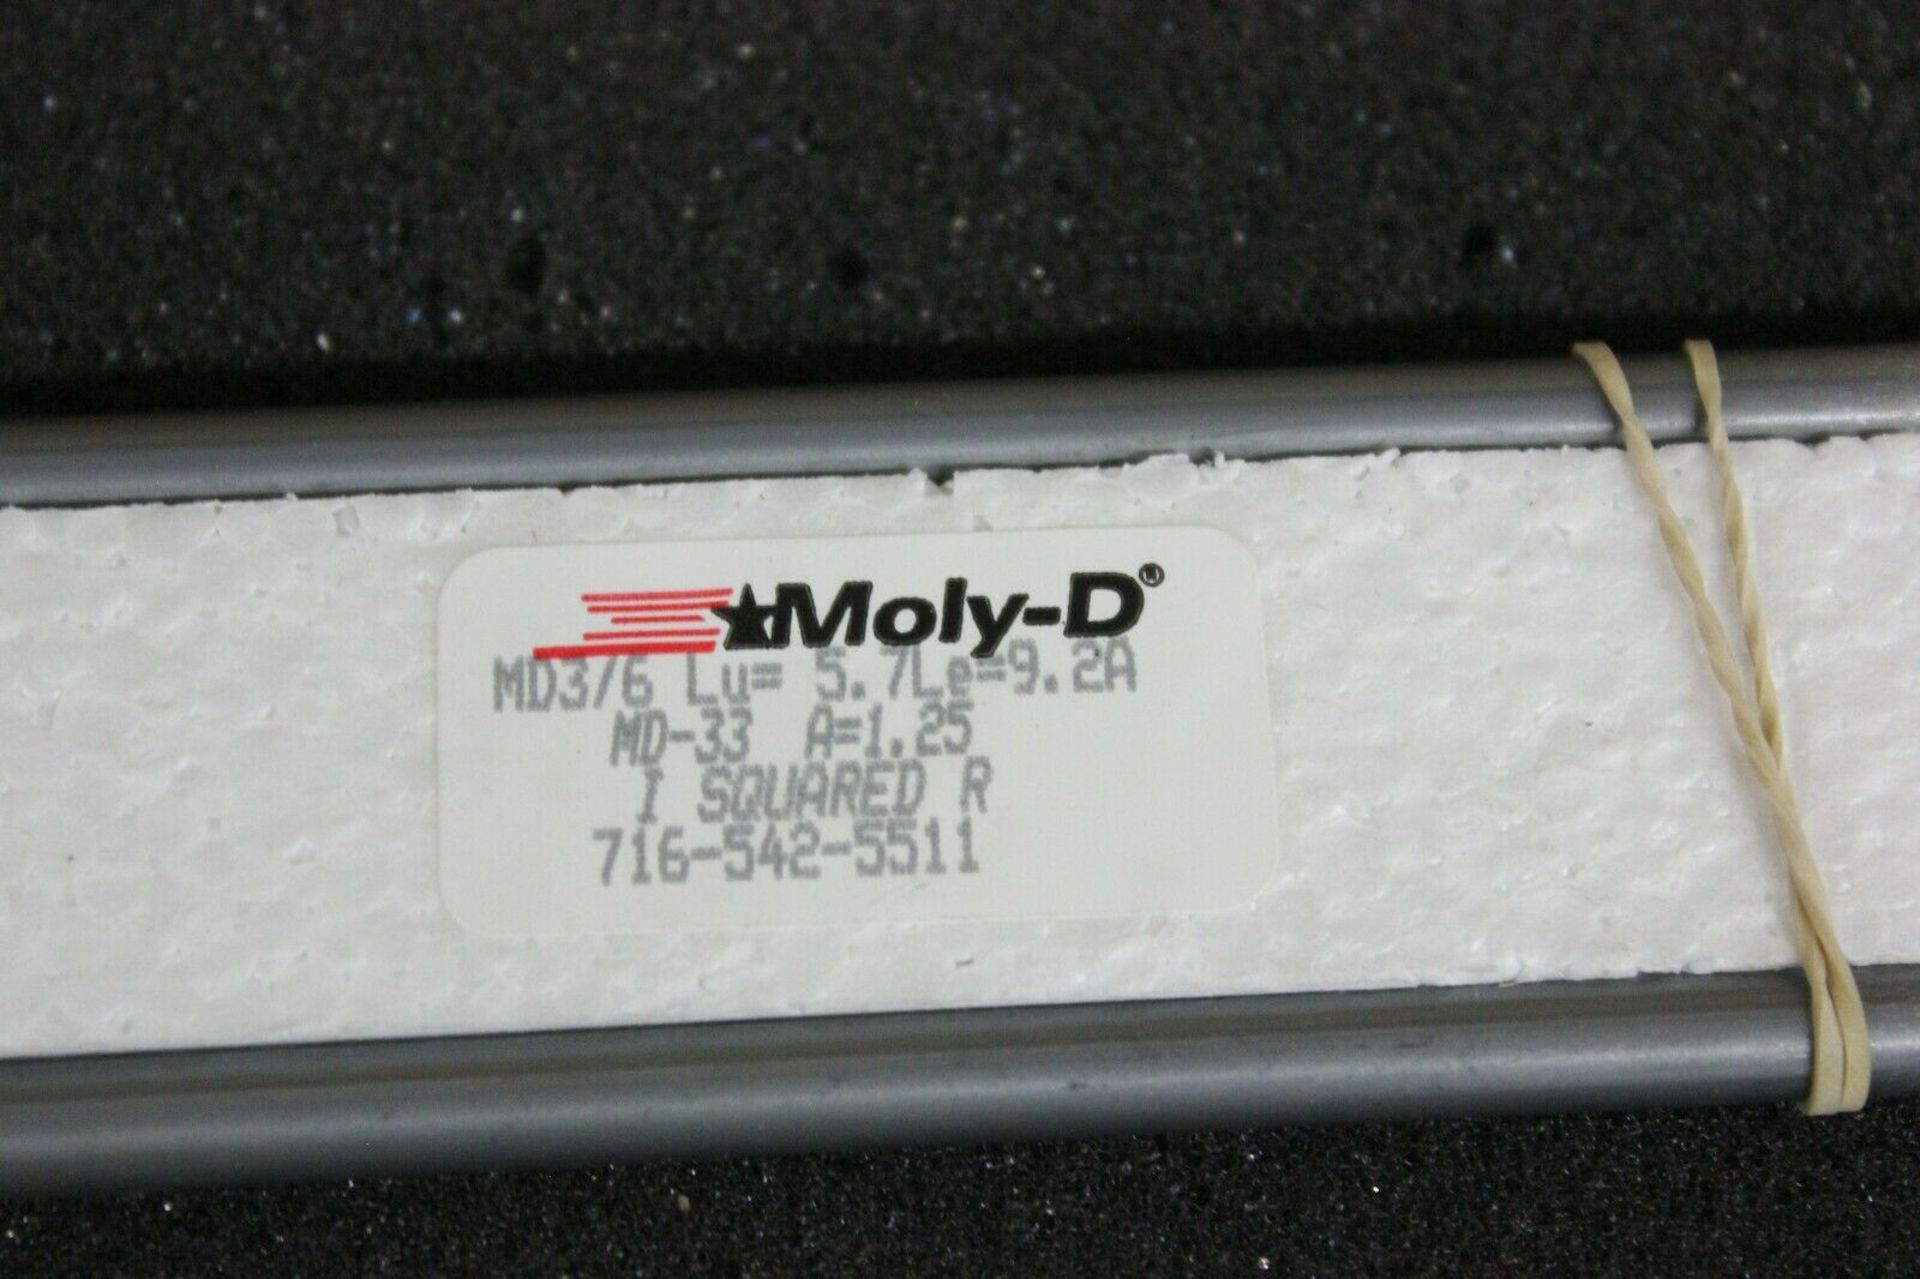 MOLY-D I SQUARED R HEATING ELEMENT - Image 2 of 2